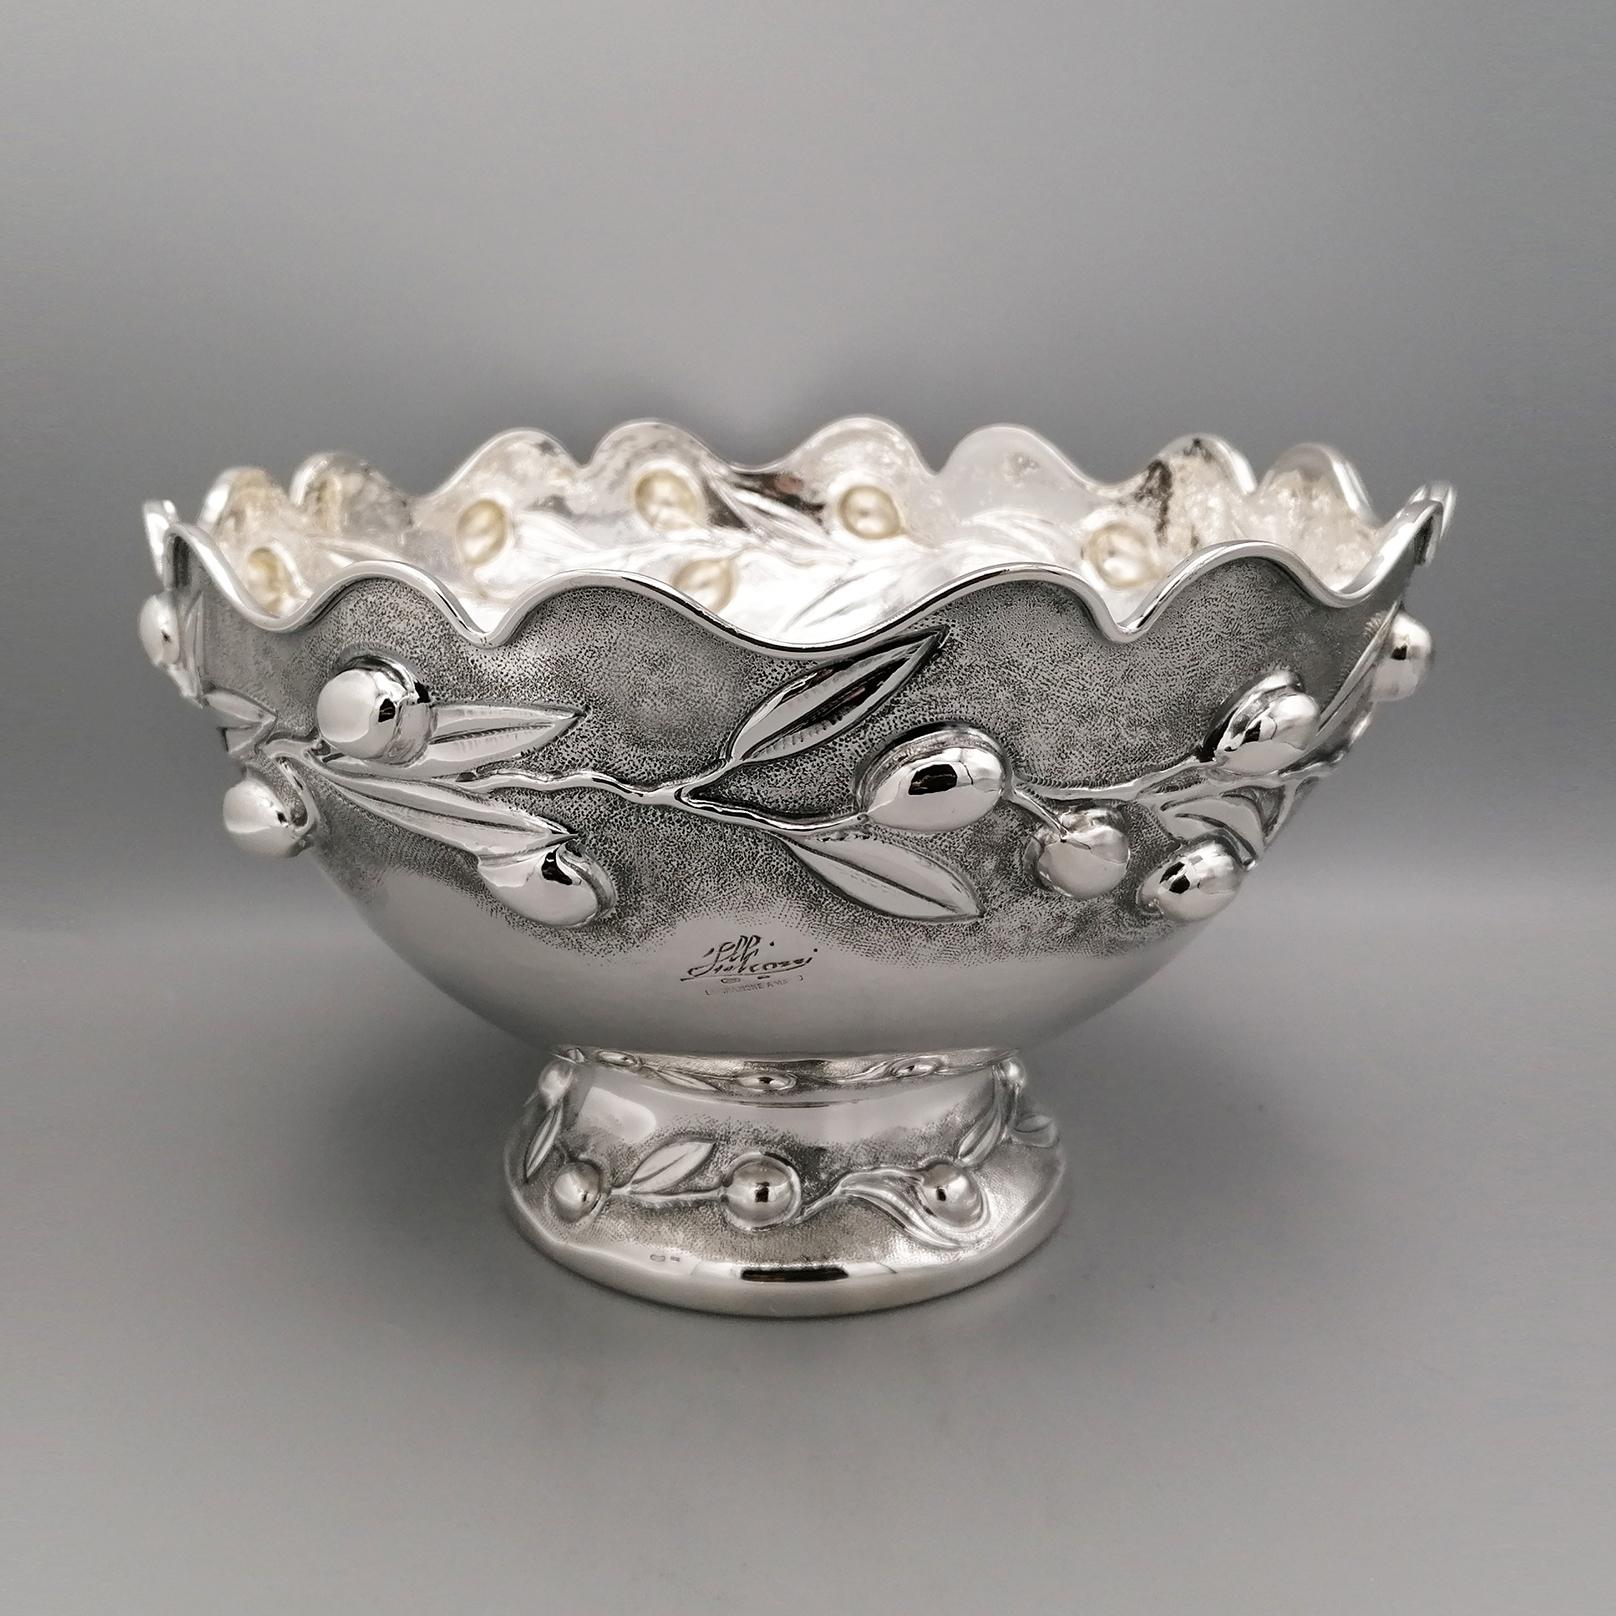 Centerpiece/bowl in solid 800 silver made entirely by hand.
The body of the bowl is rounded with the upper part scalloped in waves where a rectangular sectional edge was subsequently welded to ensure that the edge itself is not 